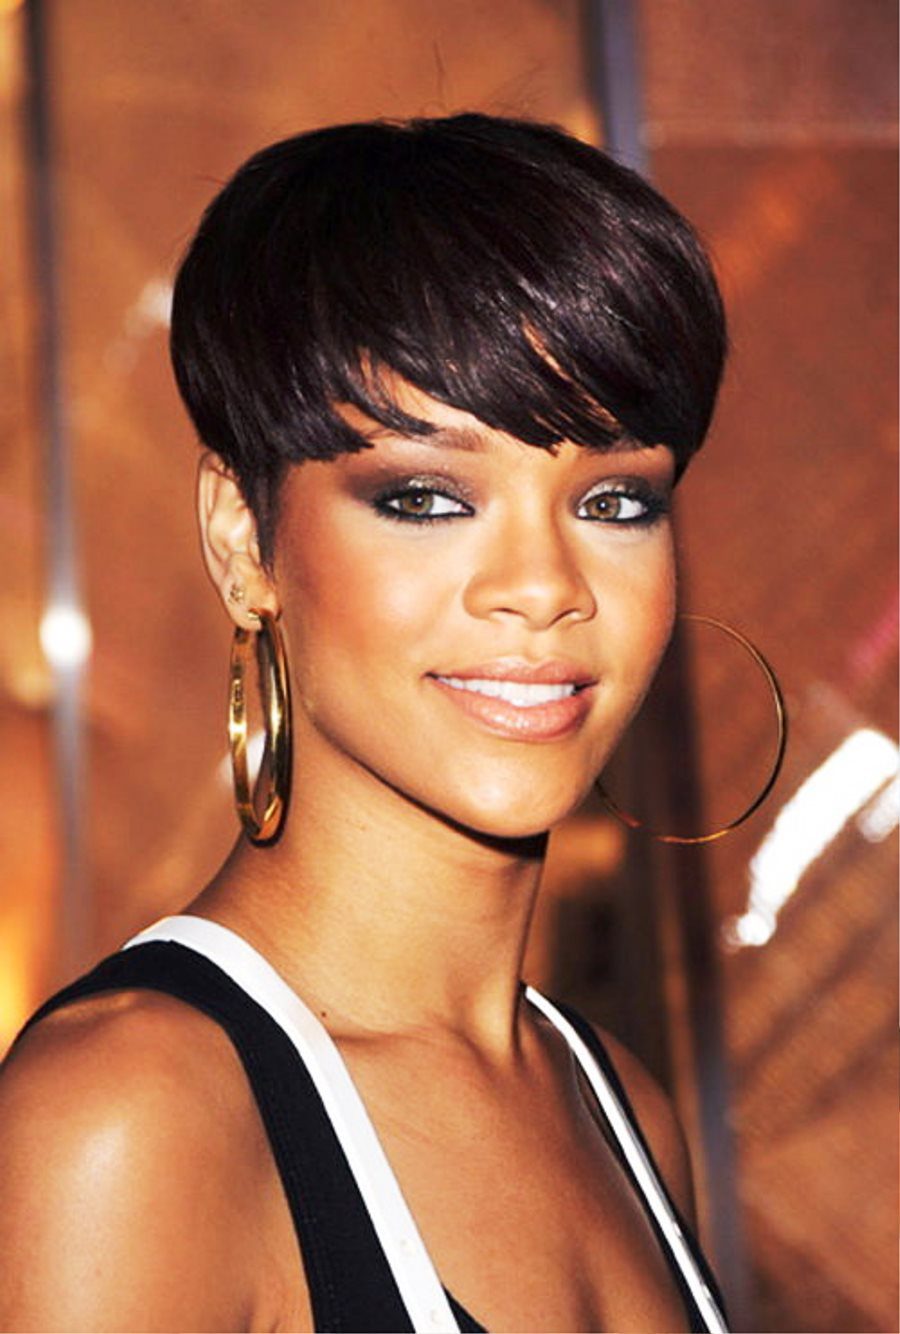 Natural Hairstyles Archives - Page 4 of 21 - Be Hairstyles